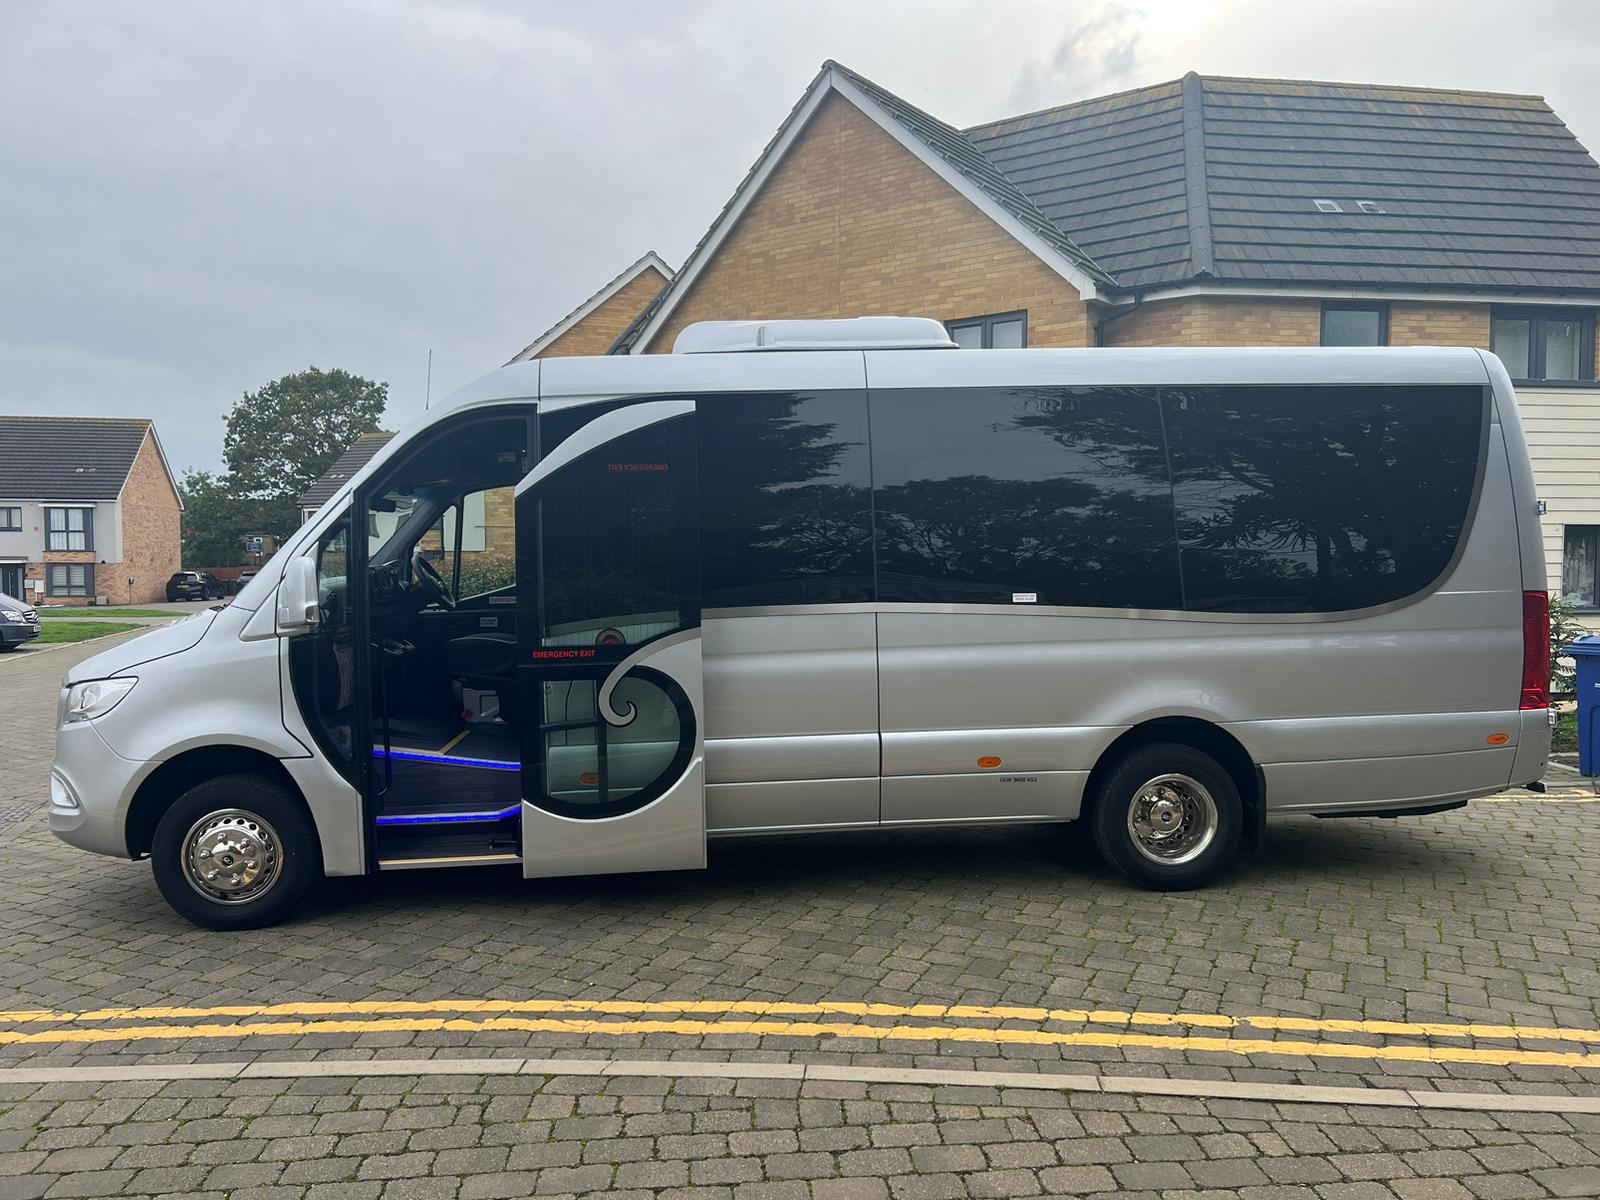 The Benefits of Hiring a Minibus for Day Trips and Events Across the UK